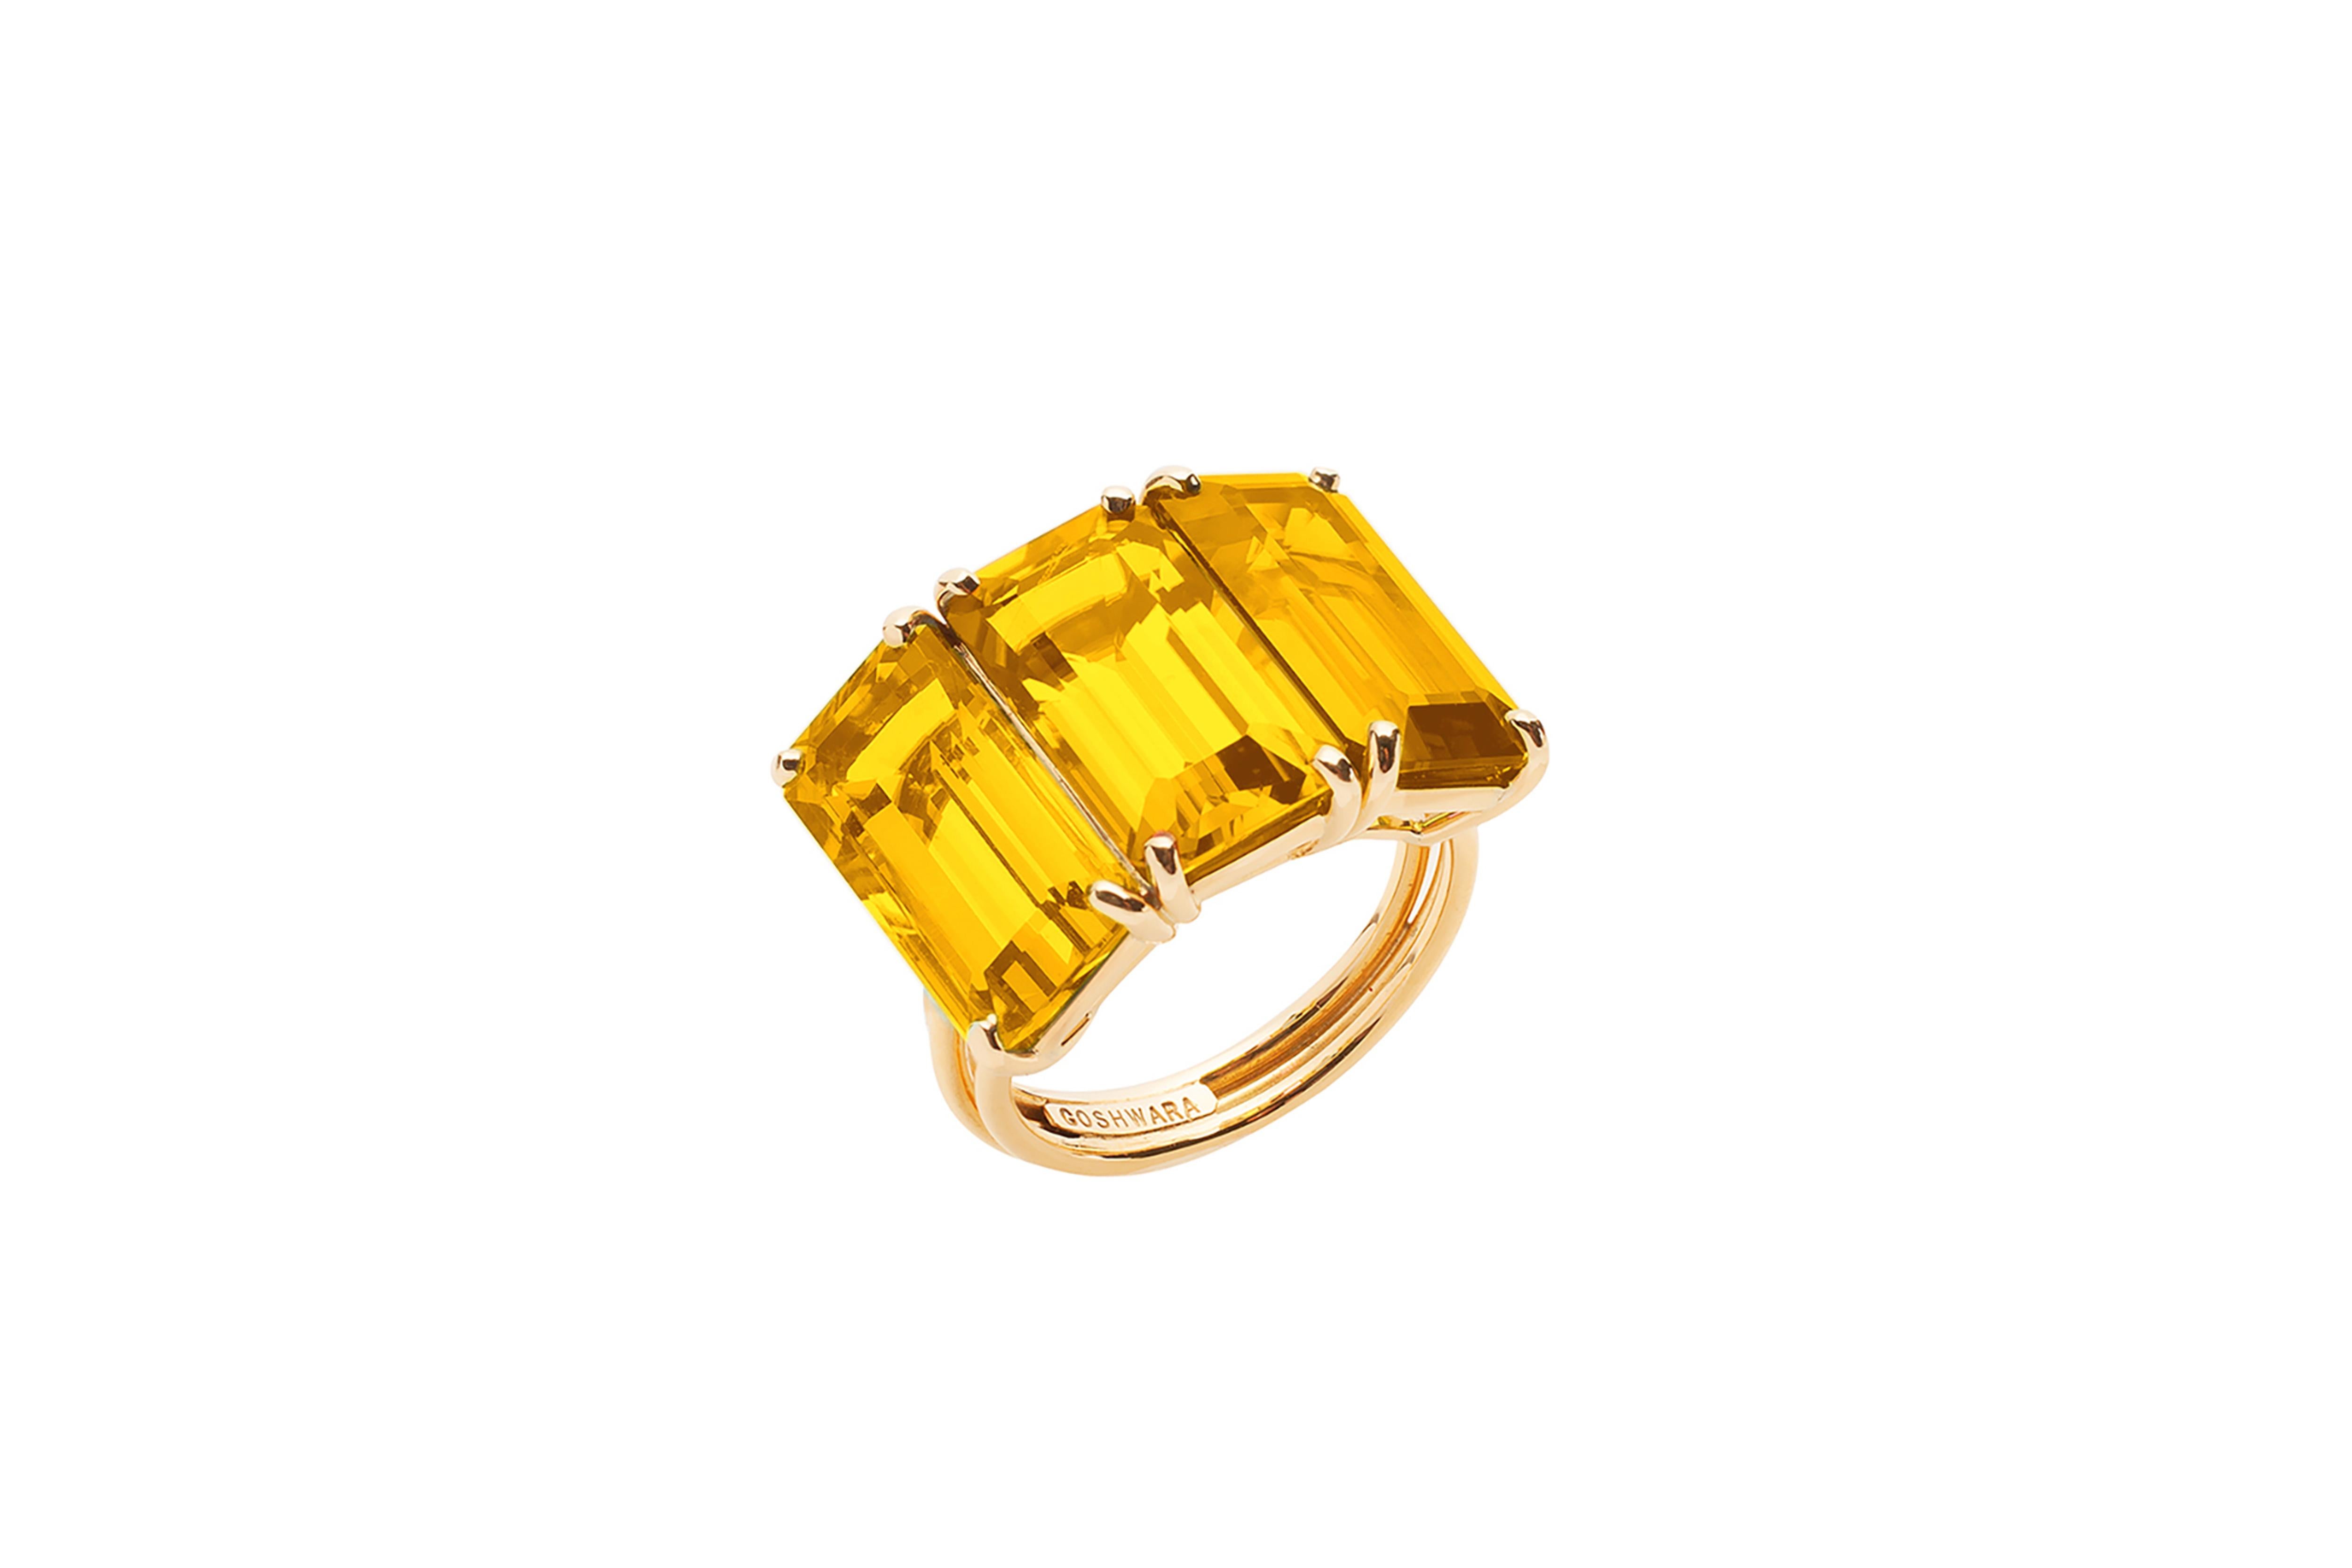 Citrine 3 Stone Emerald Cut Ring in 18K Yellow Gold from 'Gossip' Collection

Stone Size: 13 x 7 mm

Gemstone Approx. Wt: Citrine- 11.16 Carats.
